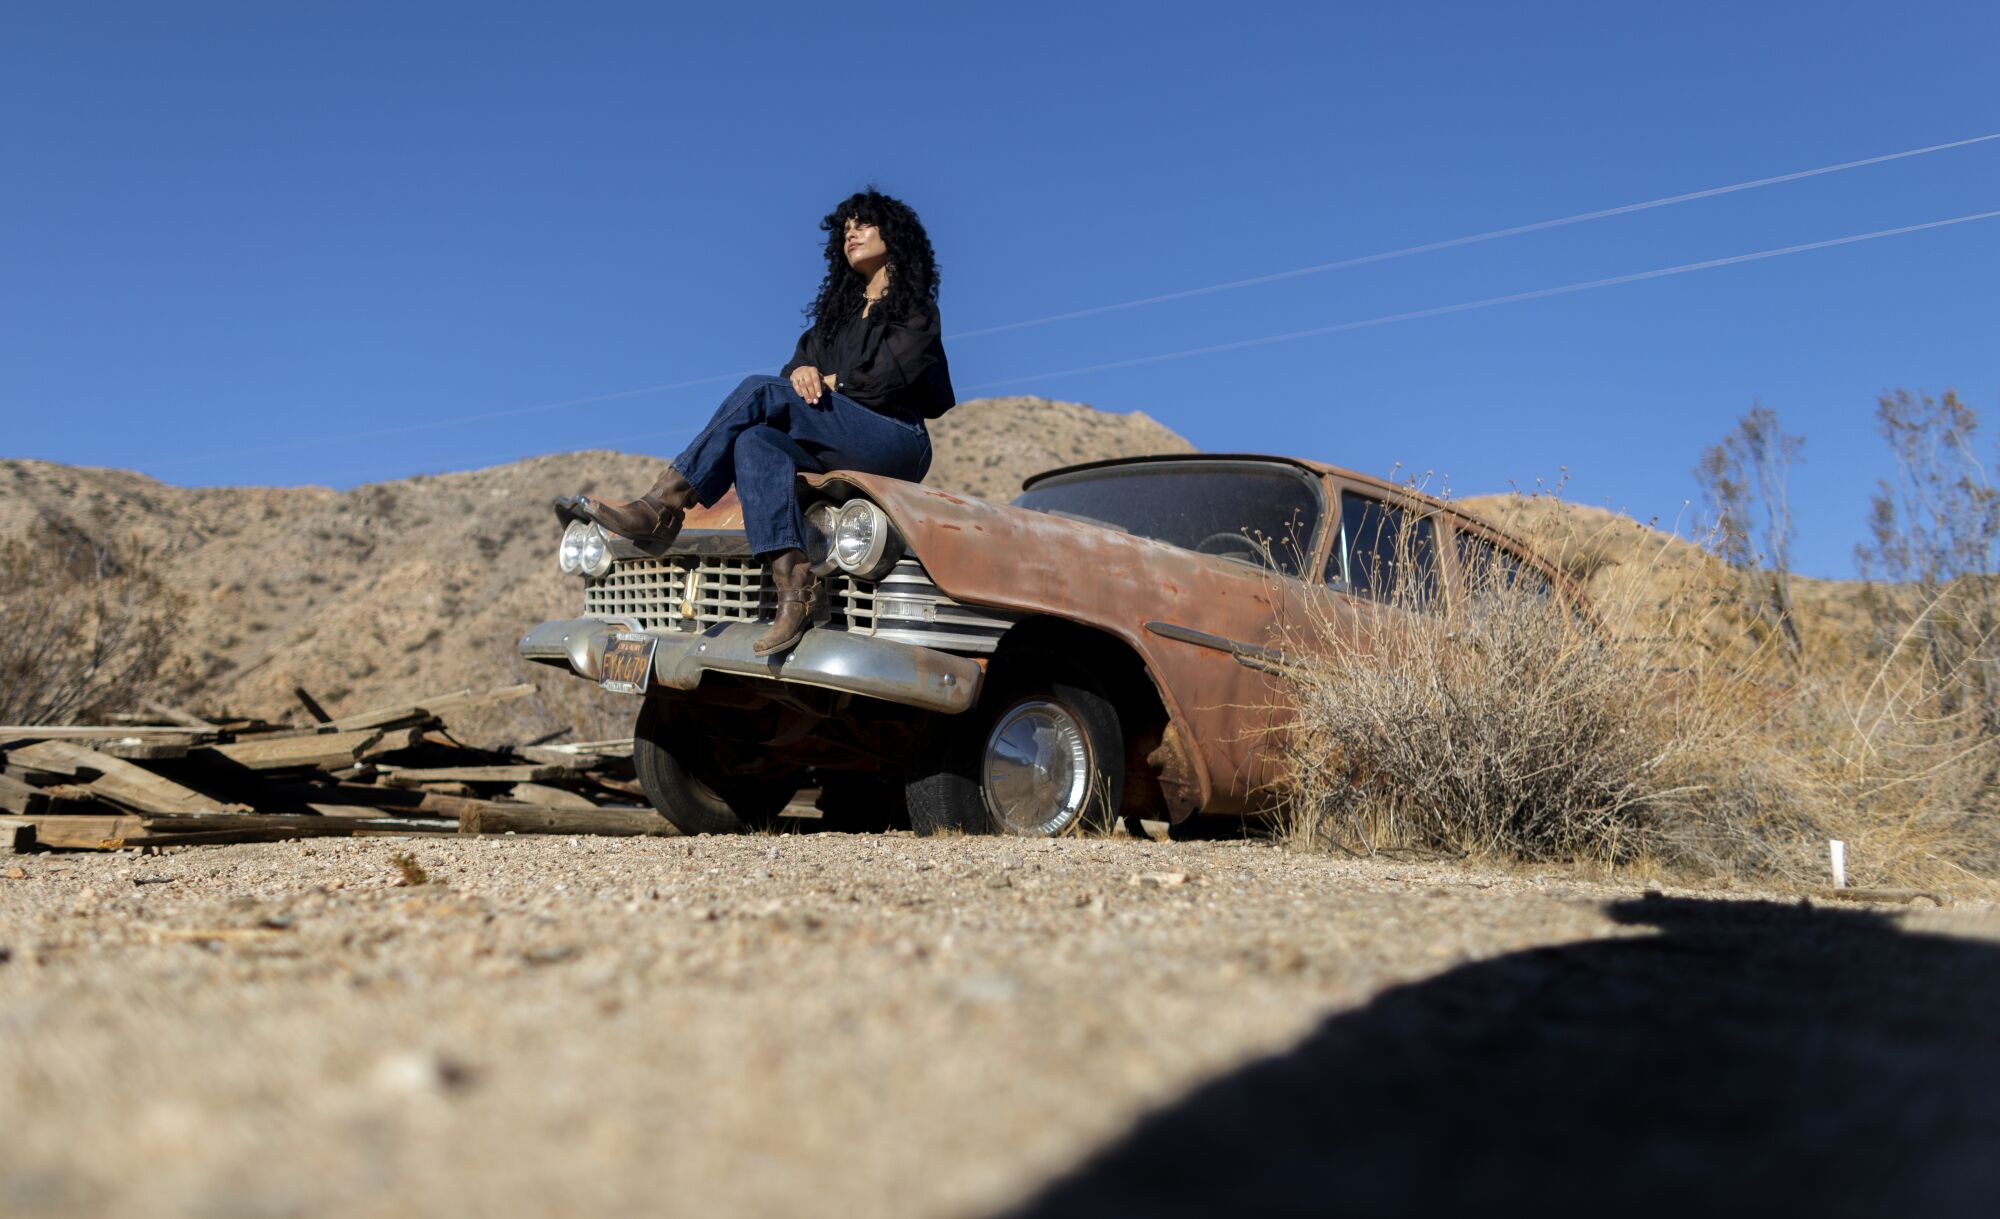 Evanice Holz enjoys the desert scenery from atop an abandoned 60's Plymouth near her home in Morongo Valley.